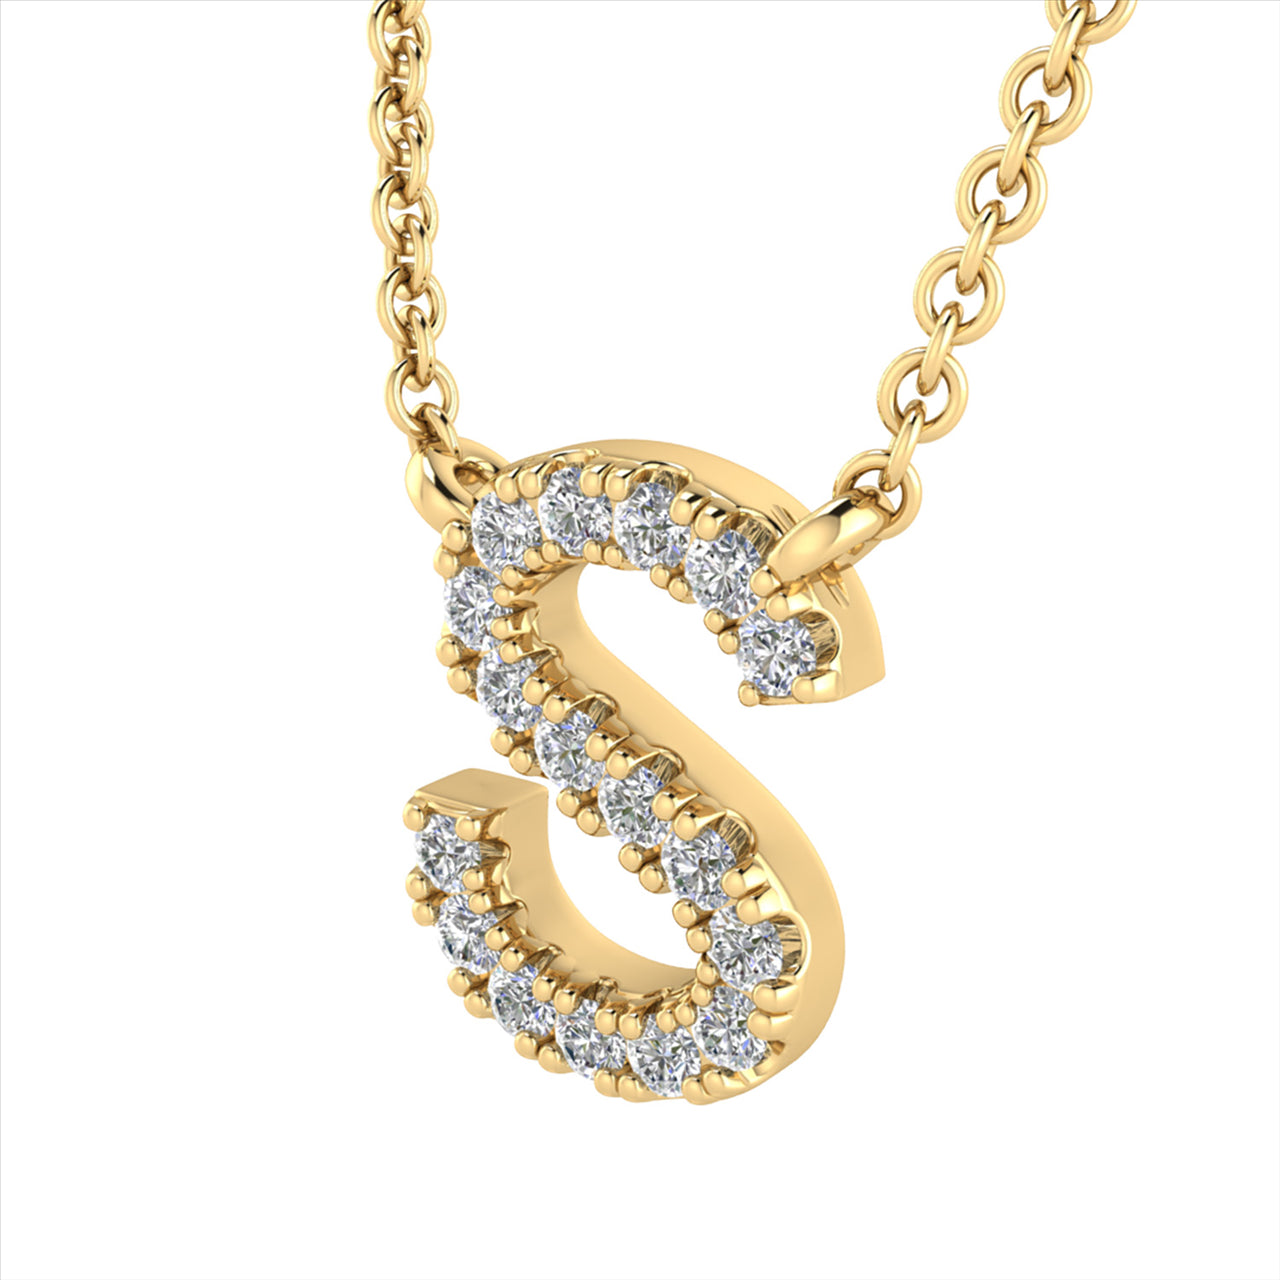 Diamond Set "S" Initial Necklace in 9 carat Yellow Gold